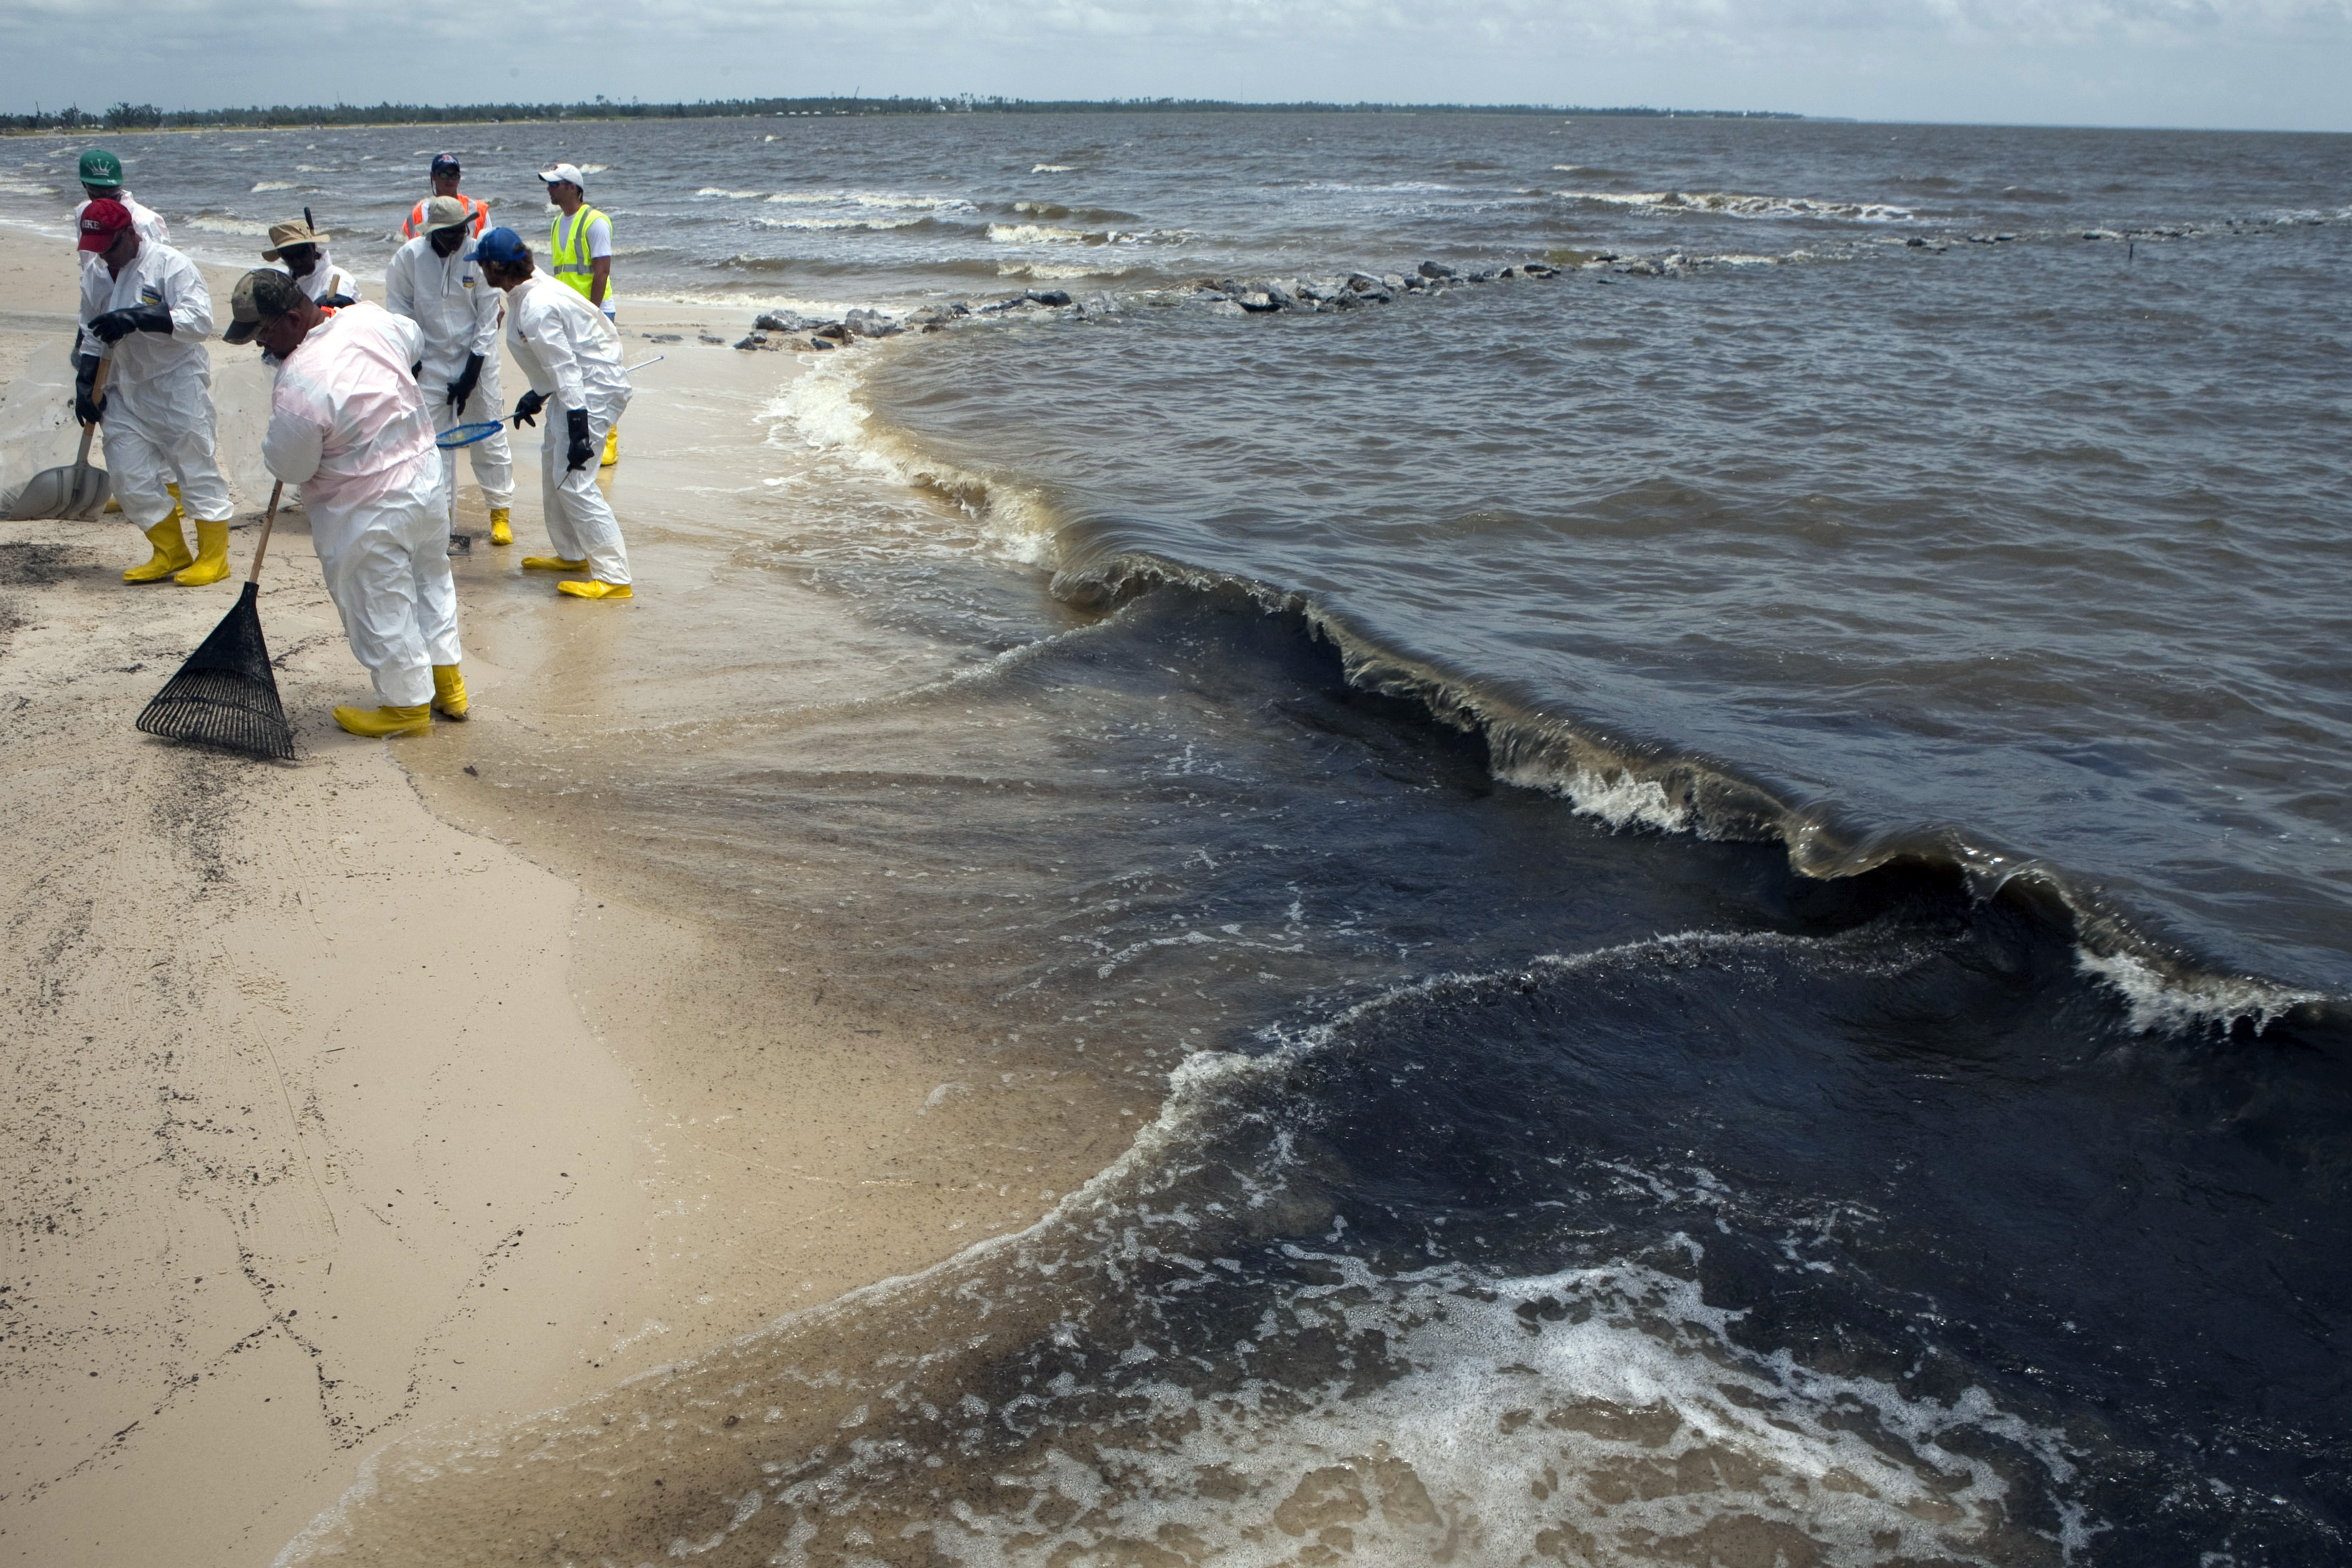 6 years from the BP Deepwater Horizon oil spill: What we've learned, and  what we shouldn't misunderstand